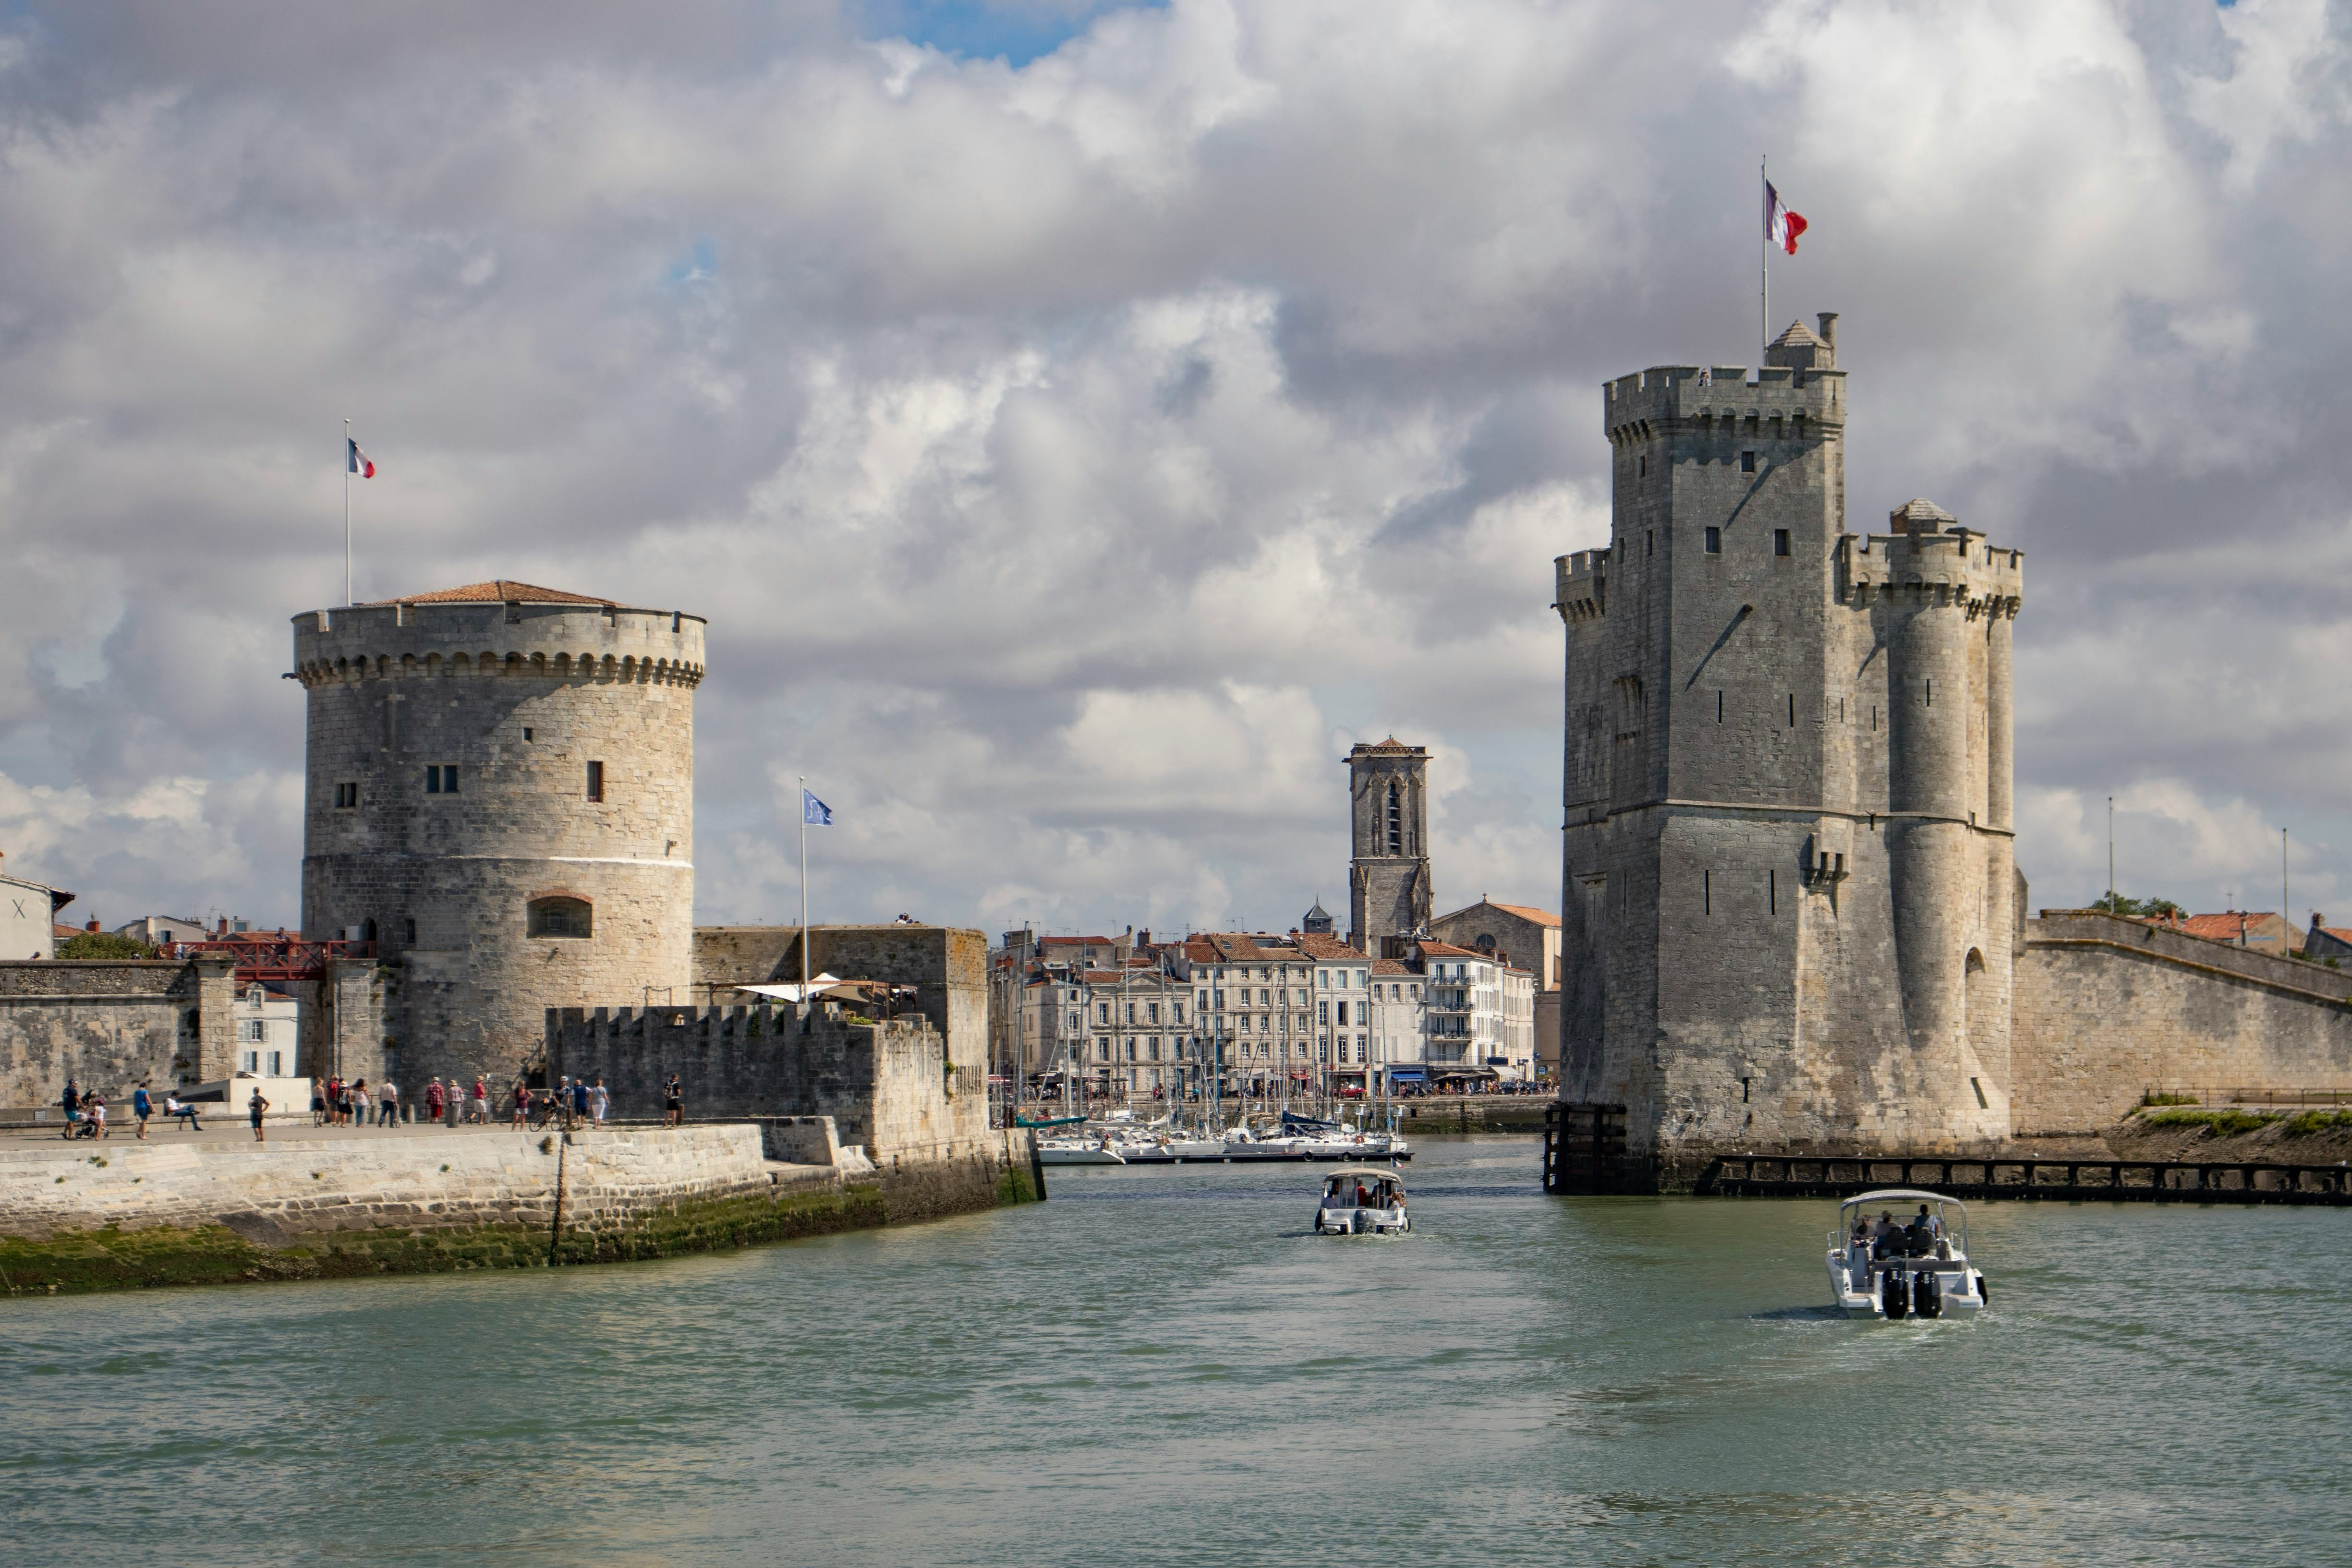 Coming back from the sea to La Rochelle harbour